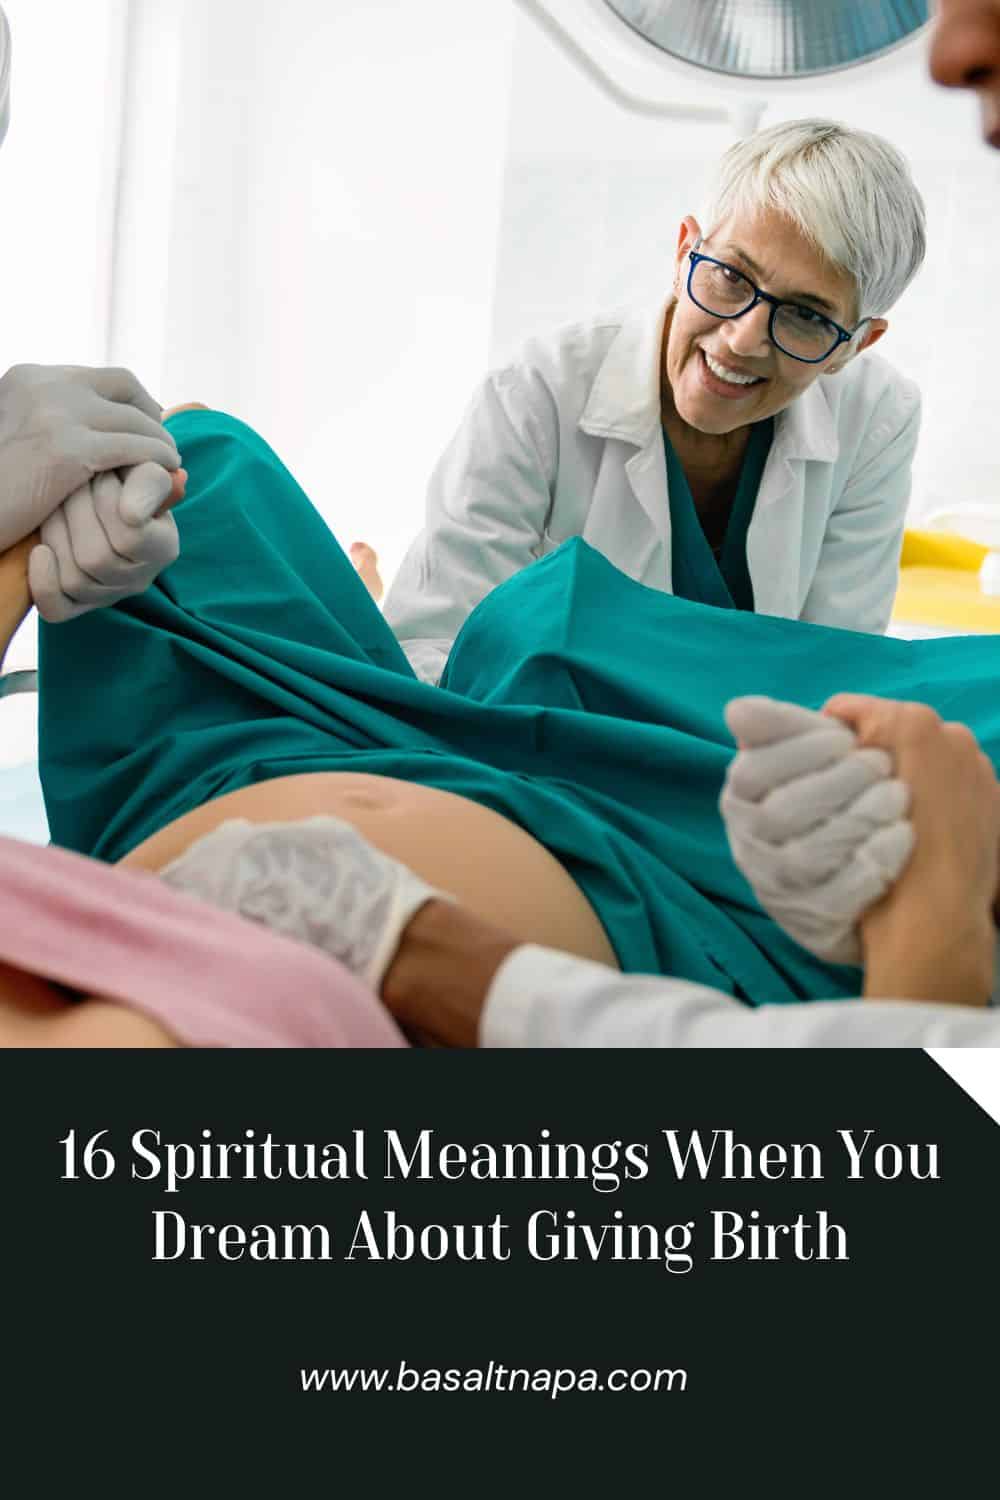 16 Spiritual Meanings When You Dream About Giving Birth